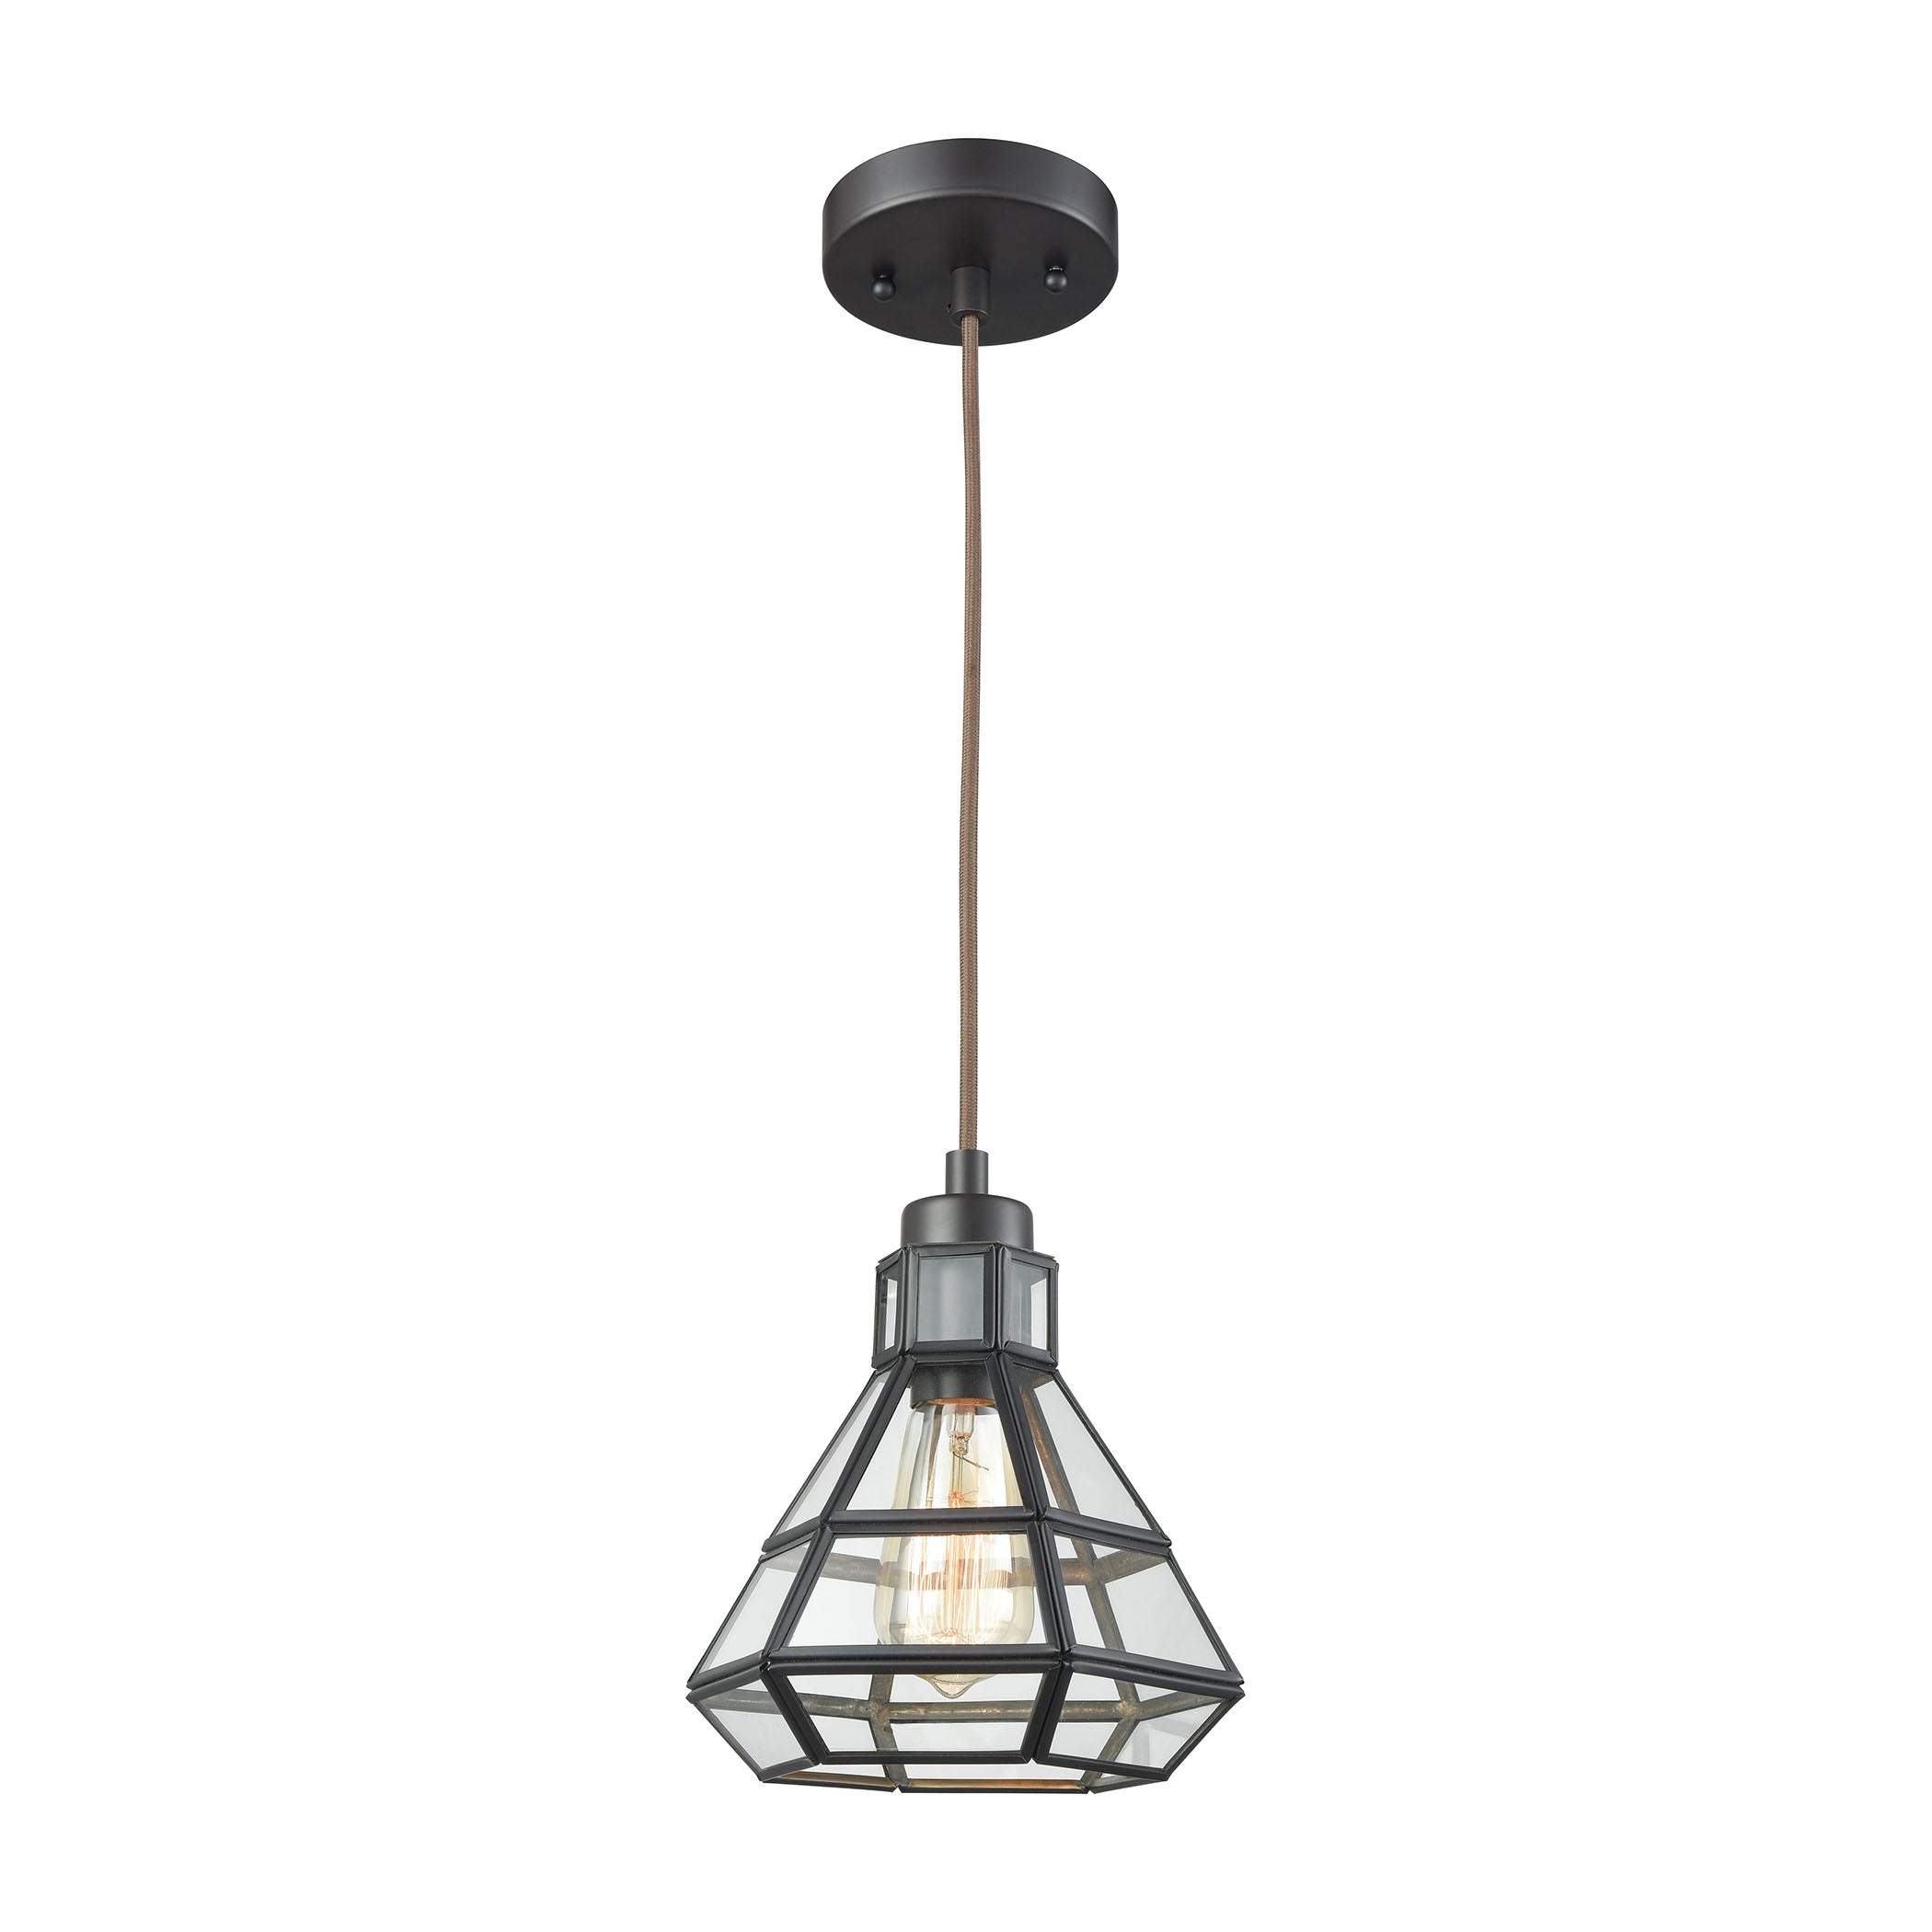 ELK Lighting 57126/1-LA Window Pane 1-Light Mini Pendant in Oil Rubbed Bronze with Clear Glass - Includes Adapter Kit